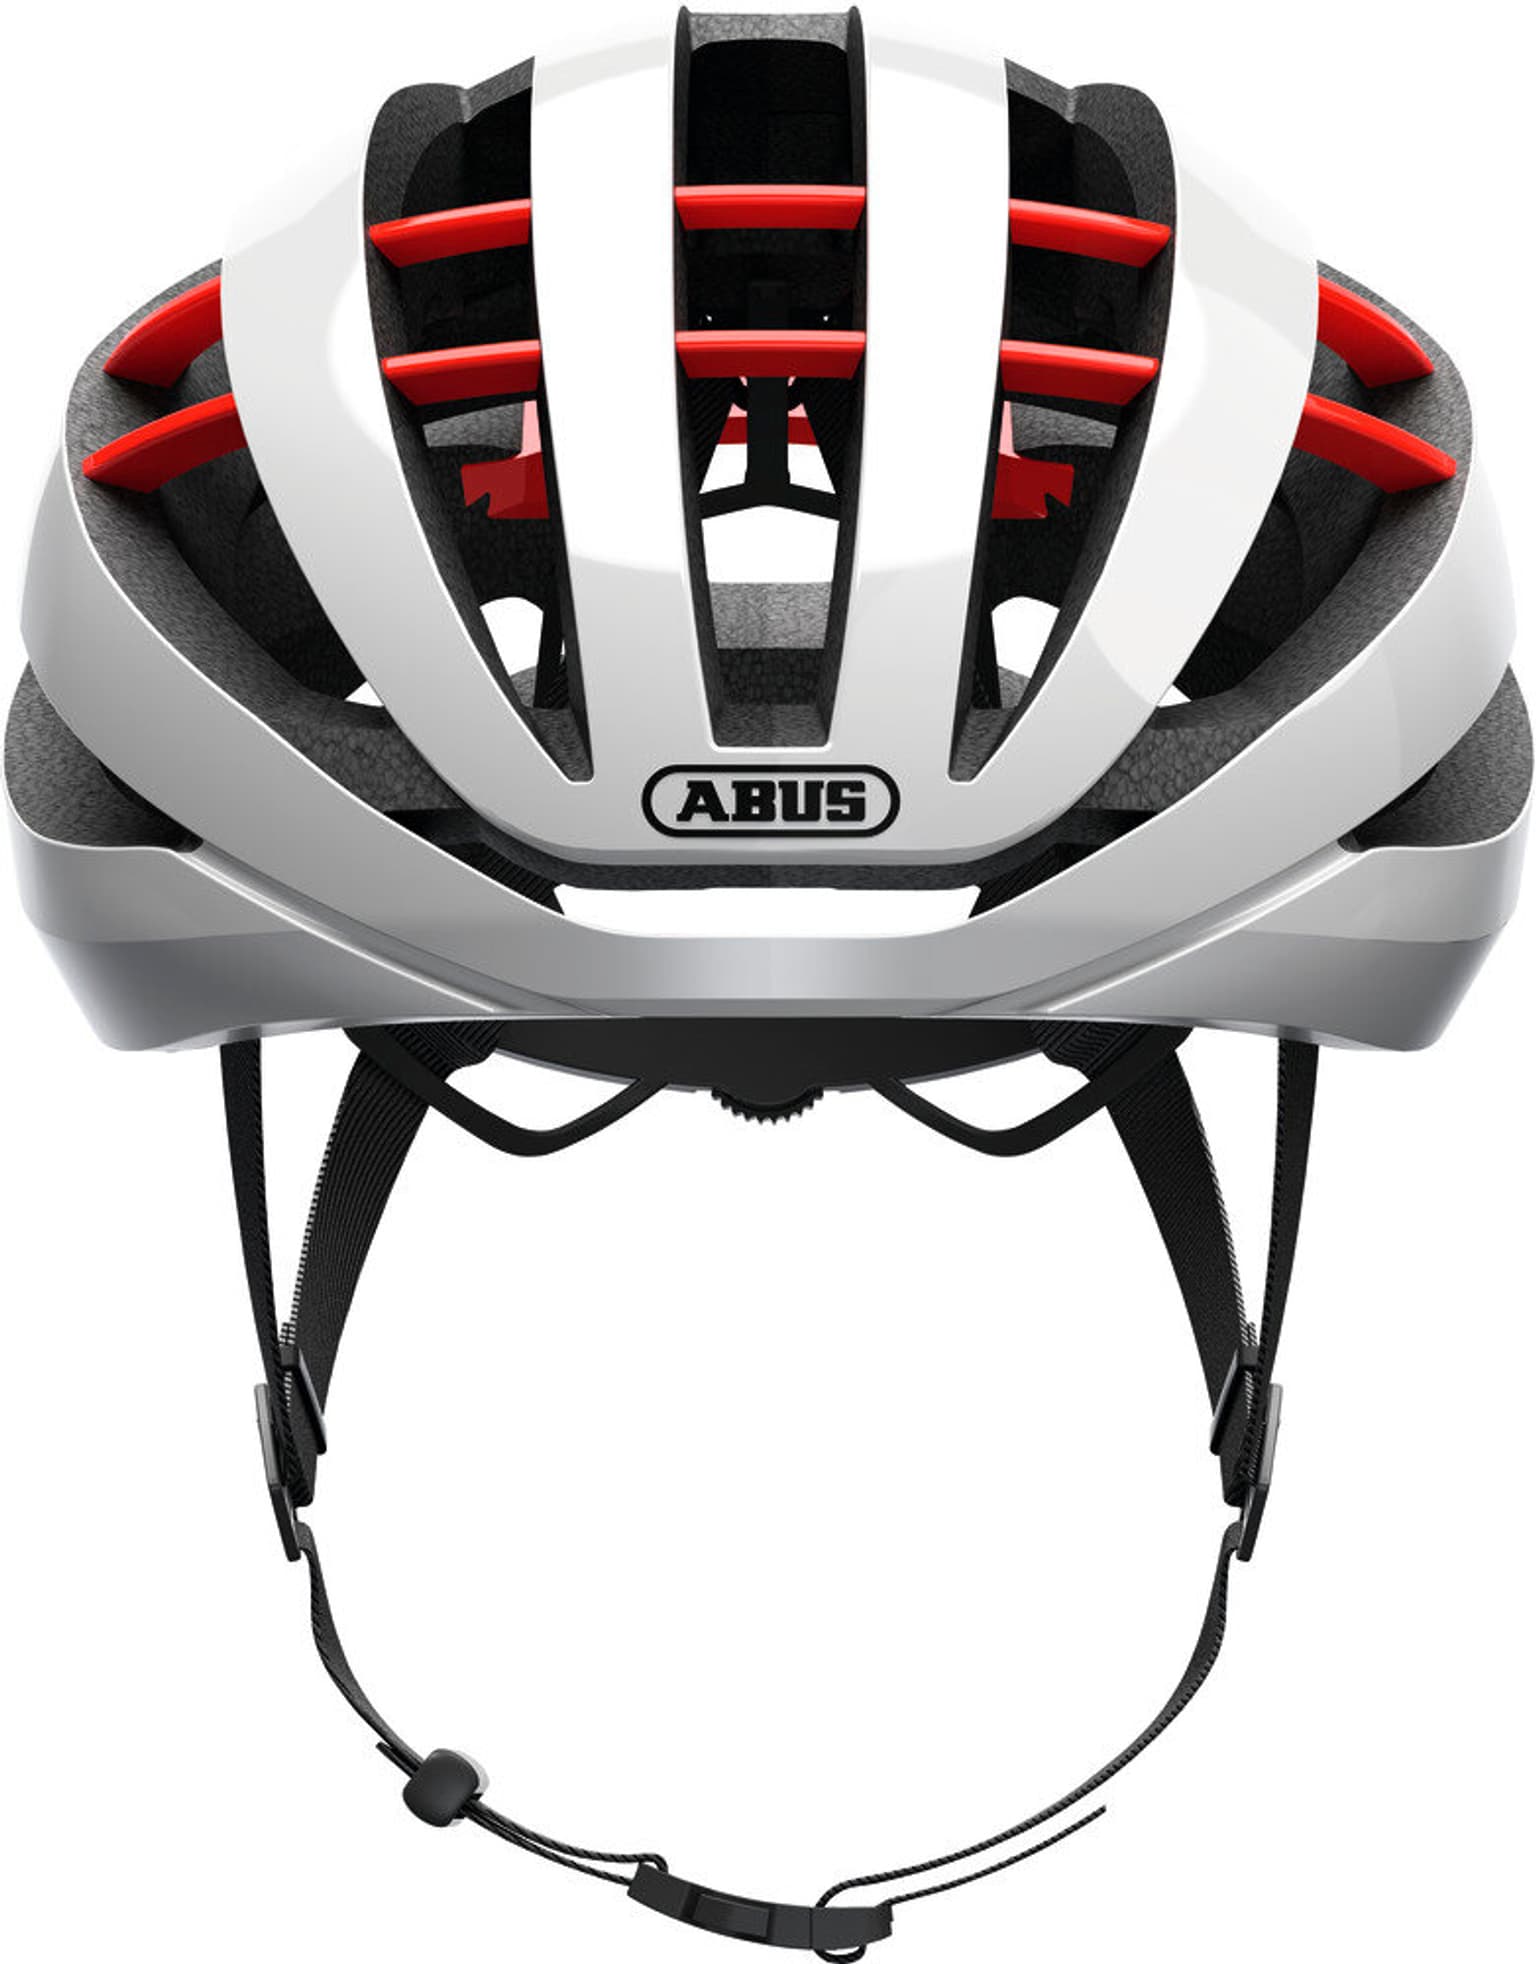 Abus Abus Aventor Quin Velohelm weiss 2